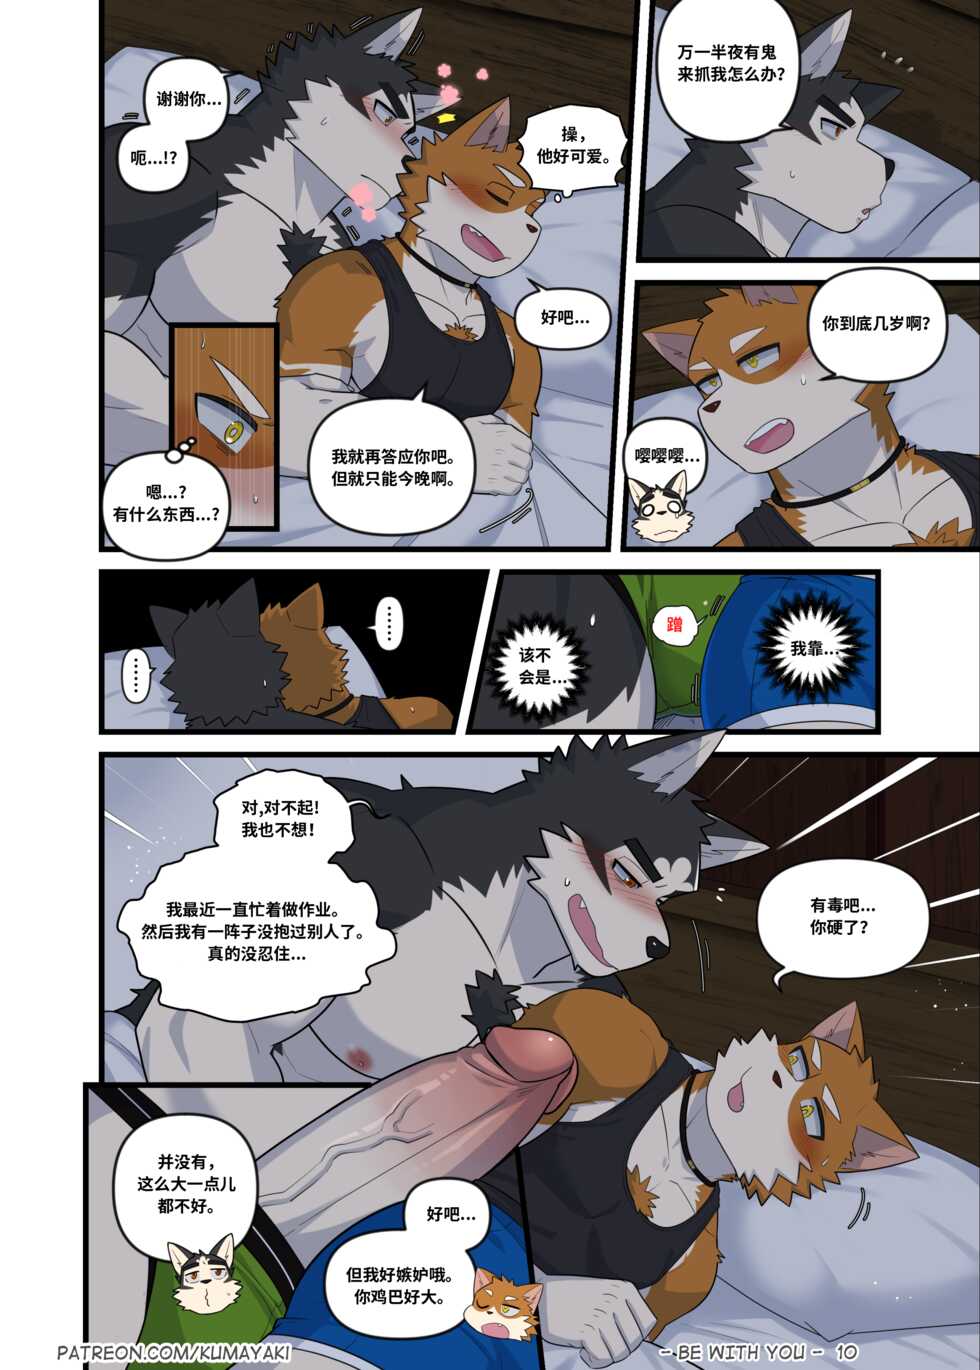 [Luwei] Be With You 狗大汉化 [Simplified Chinese] [Ongoing] - Page 14